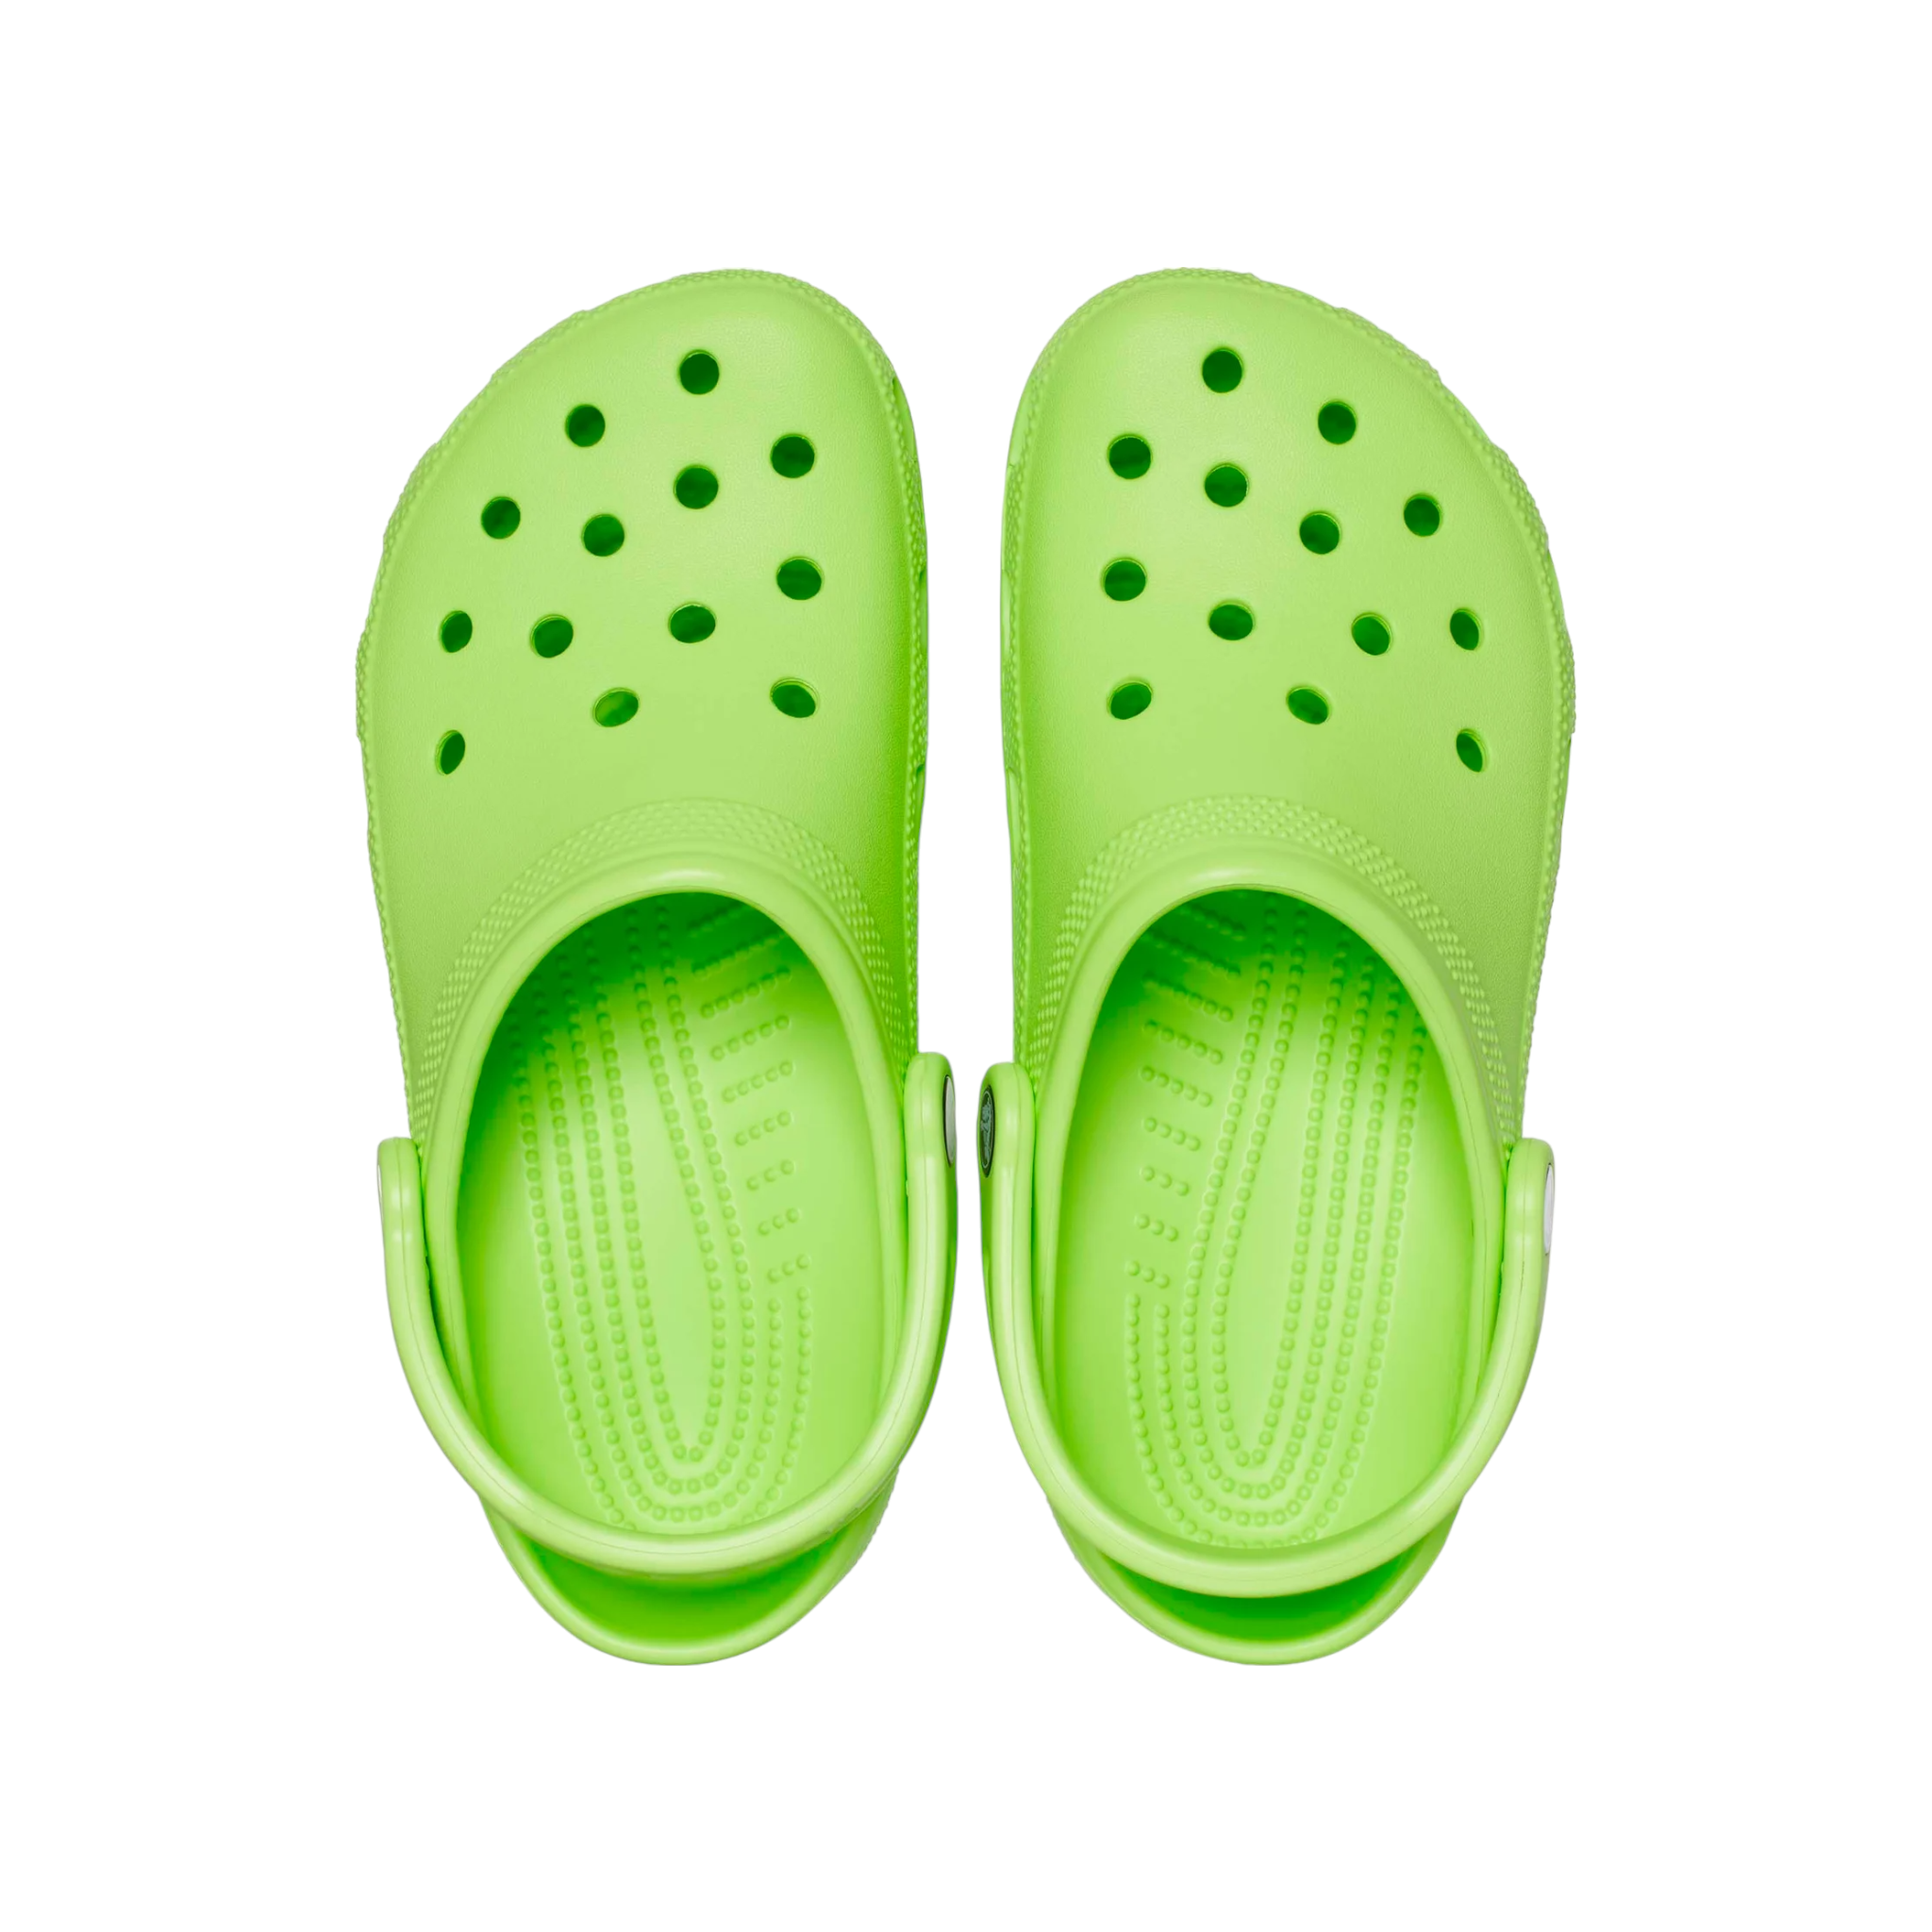 Crocs Classic Clogs online and instore with shoe&me Mount Maunganui. Shop limeade Clogs